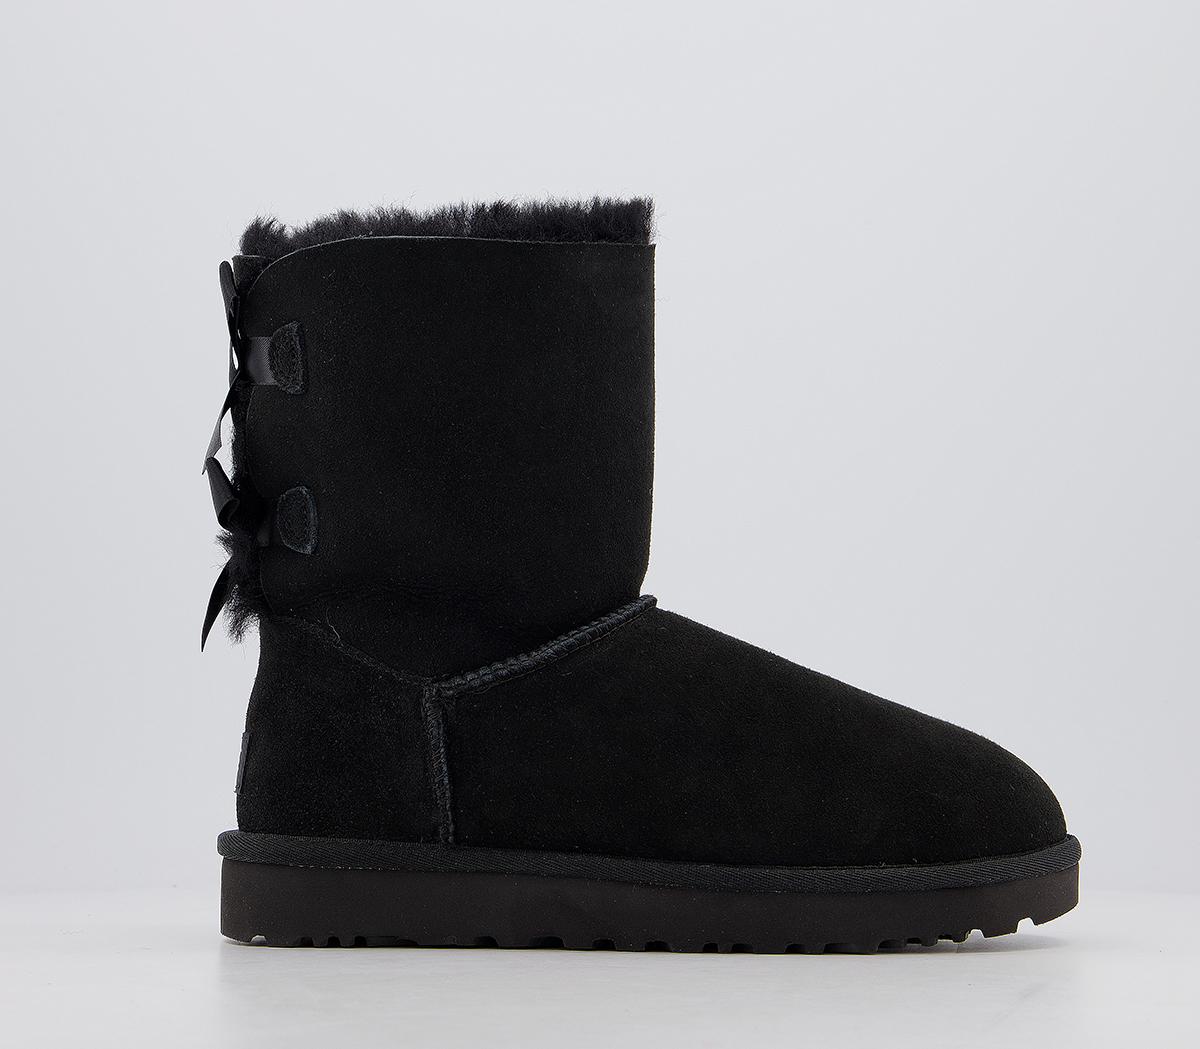 UGG Bailey Bow II Calf Boots Black Suede - Women's Ankle Boots